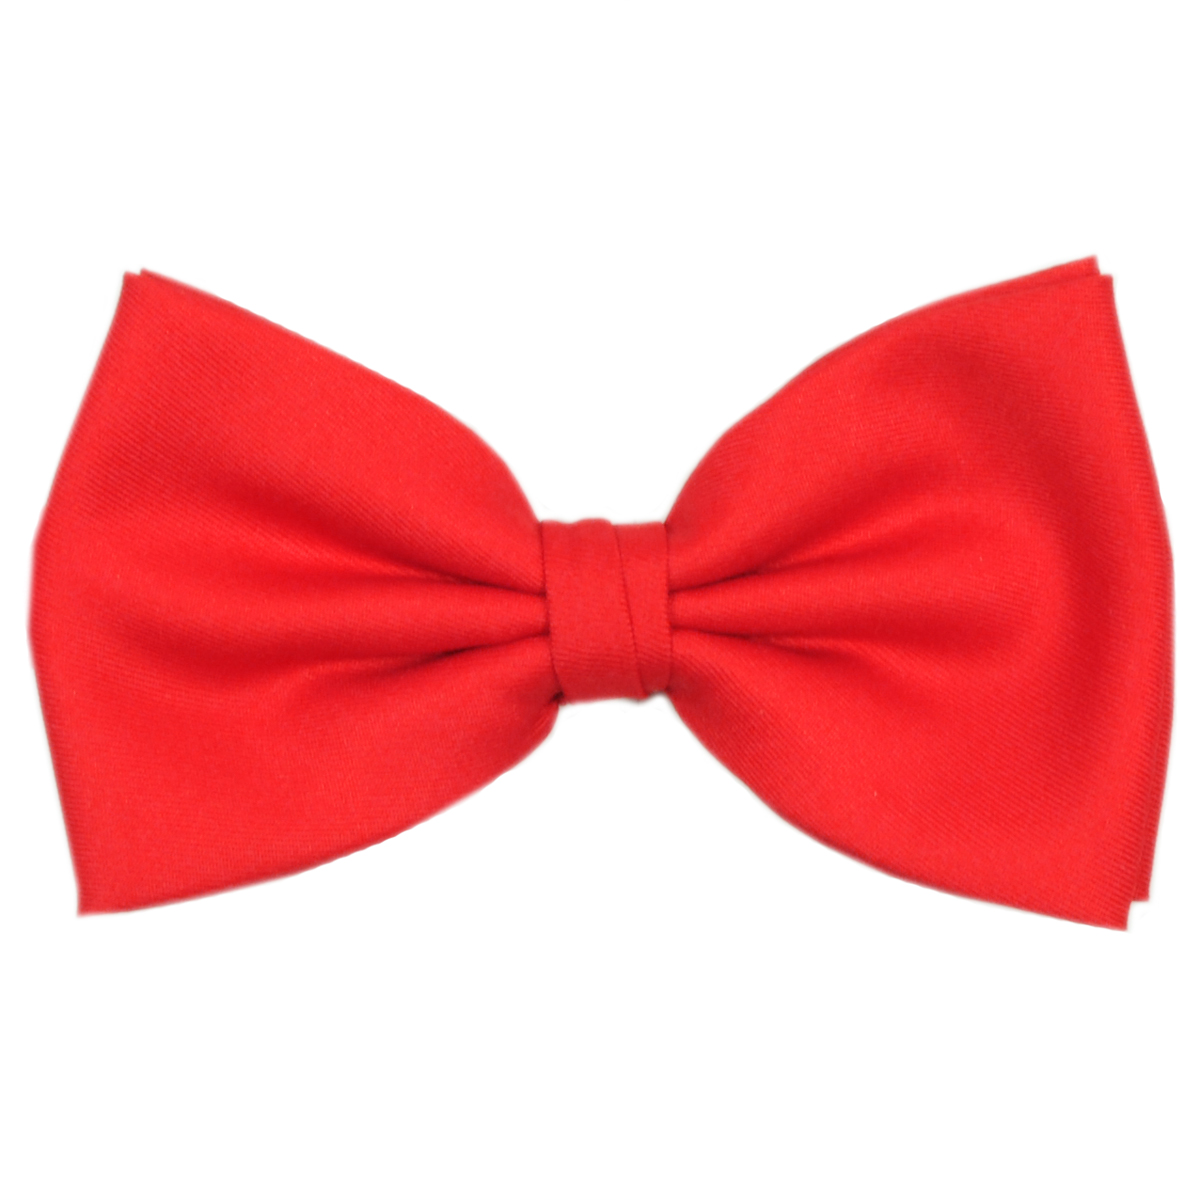 Bow Ties Pictures - ClipArt Best